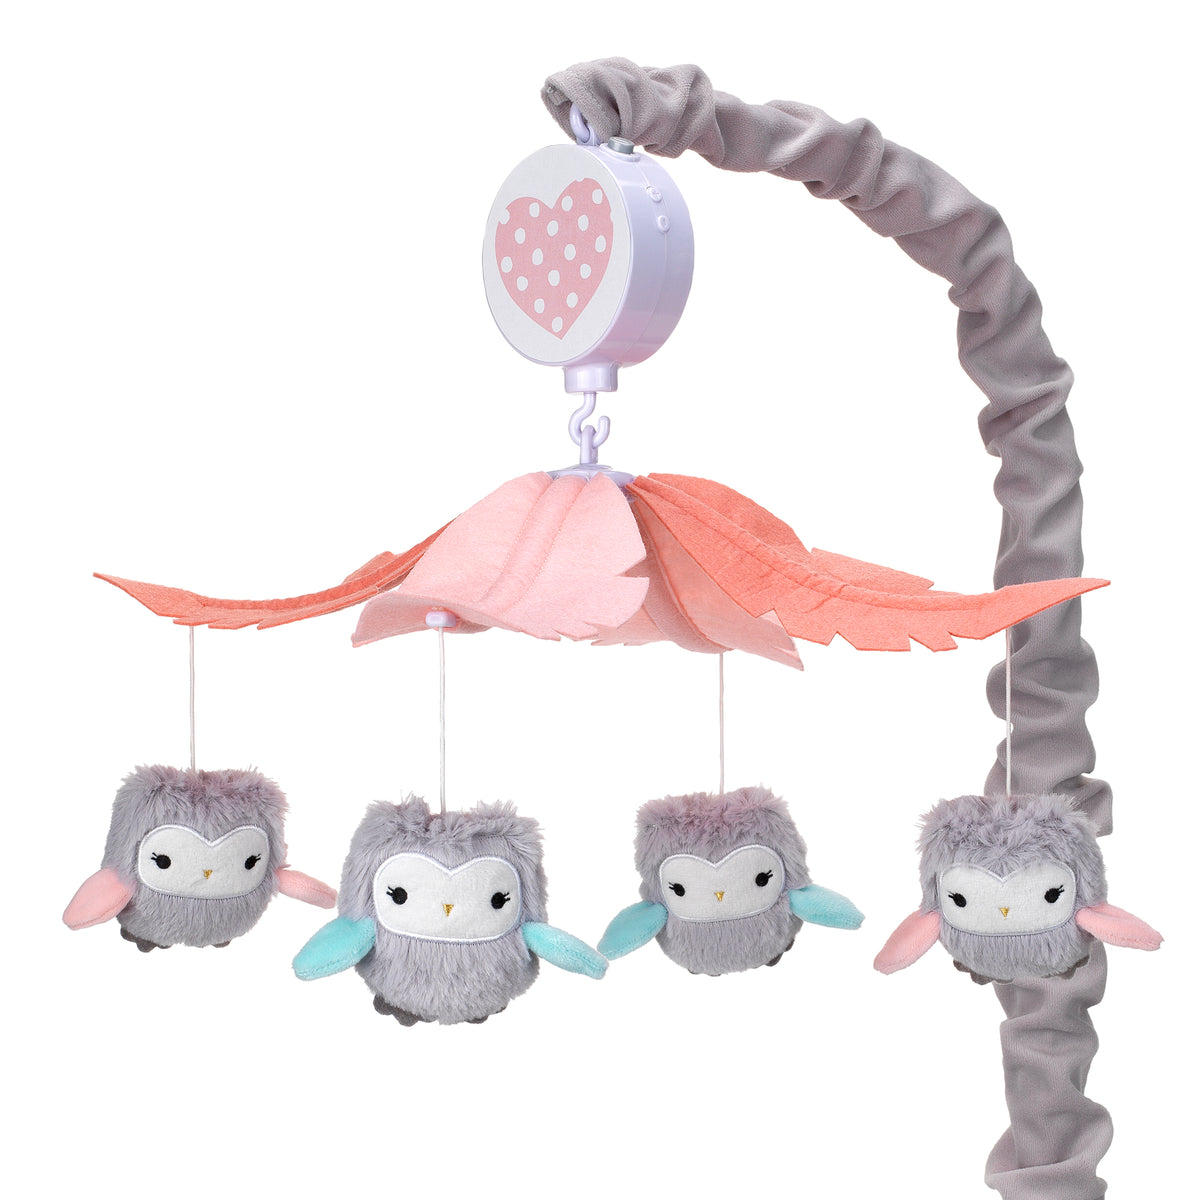 Baby mobile - Sully the musical owl – petitloulou